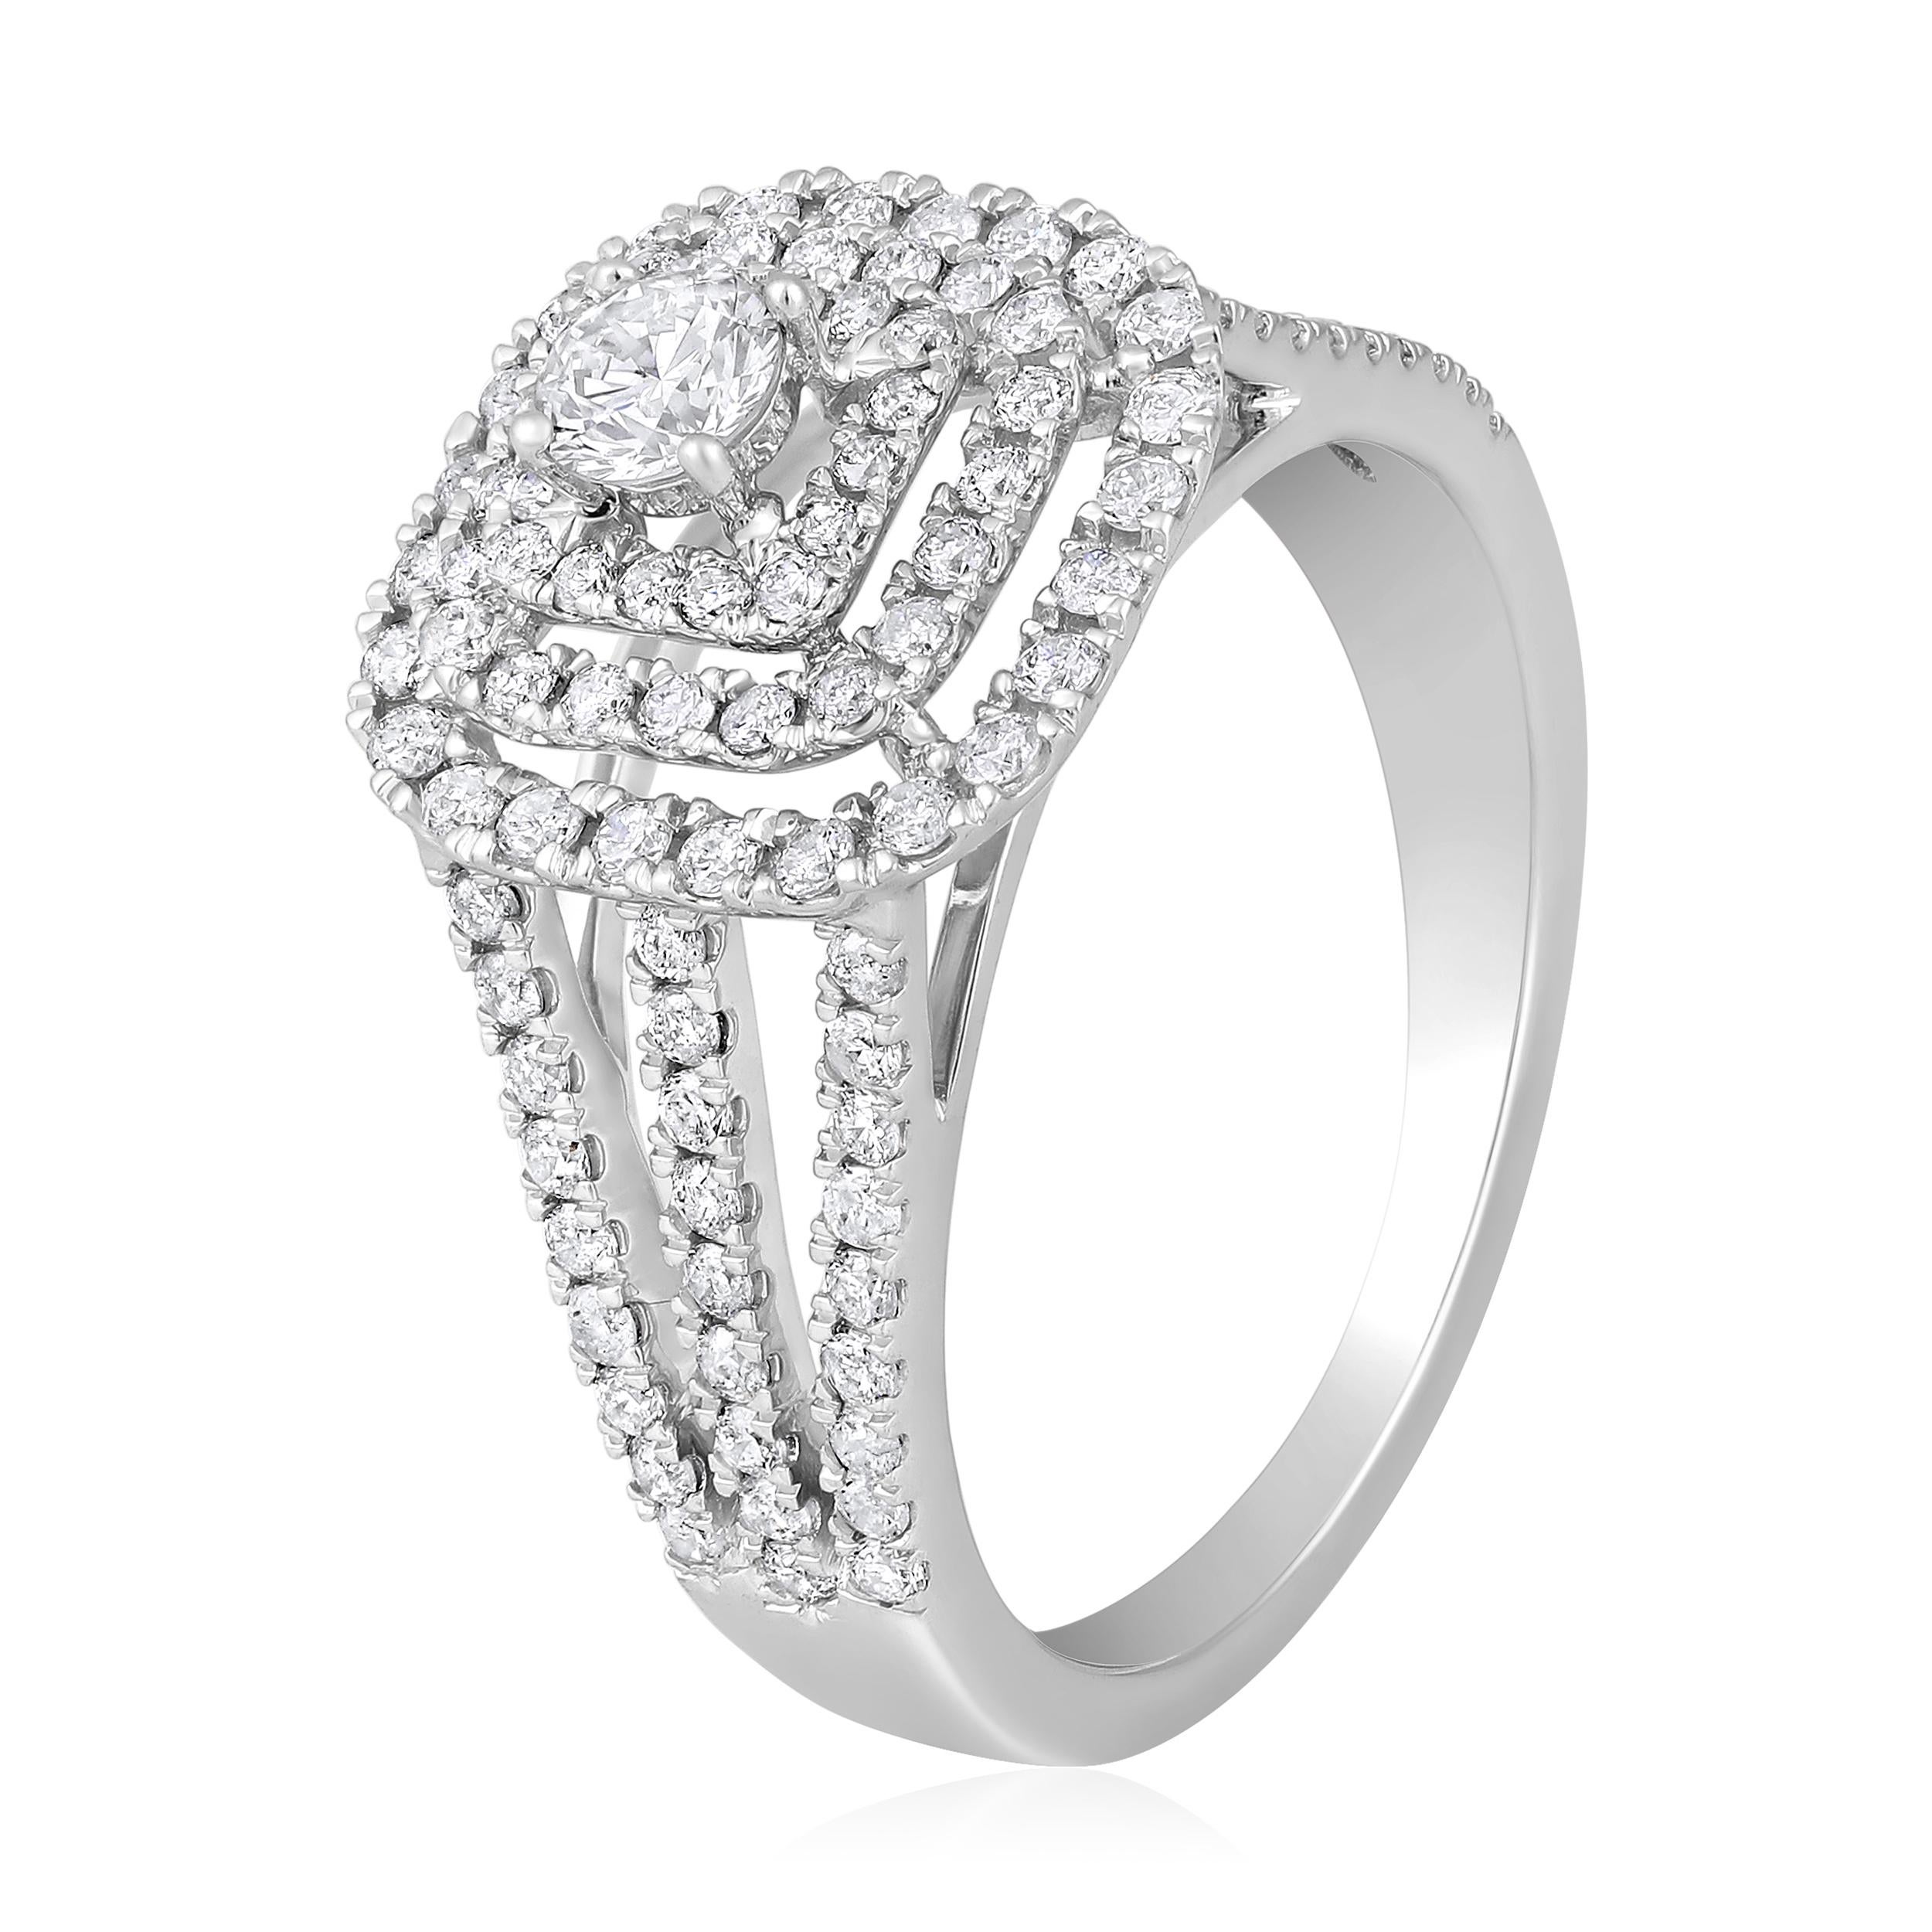 Ring Size: US 7

Crafted in 4.11 grams of 14K White Gold, the ring contains 114 stones of Round Natural Diamonds with a total of 0.87 carat in G-H color and I1-I2 clarity combined with 1 stone of Round Solitaire Natural Diamond with a total of 0.19